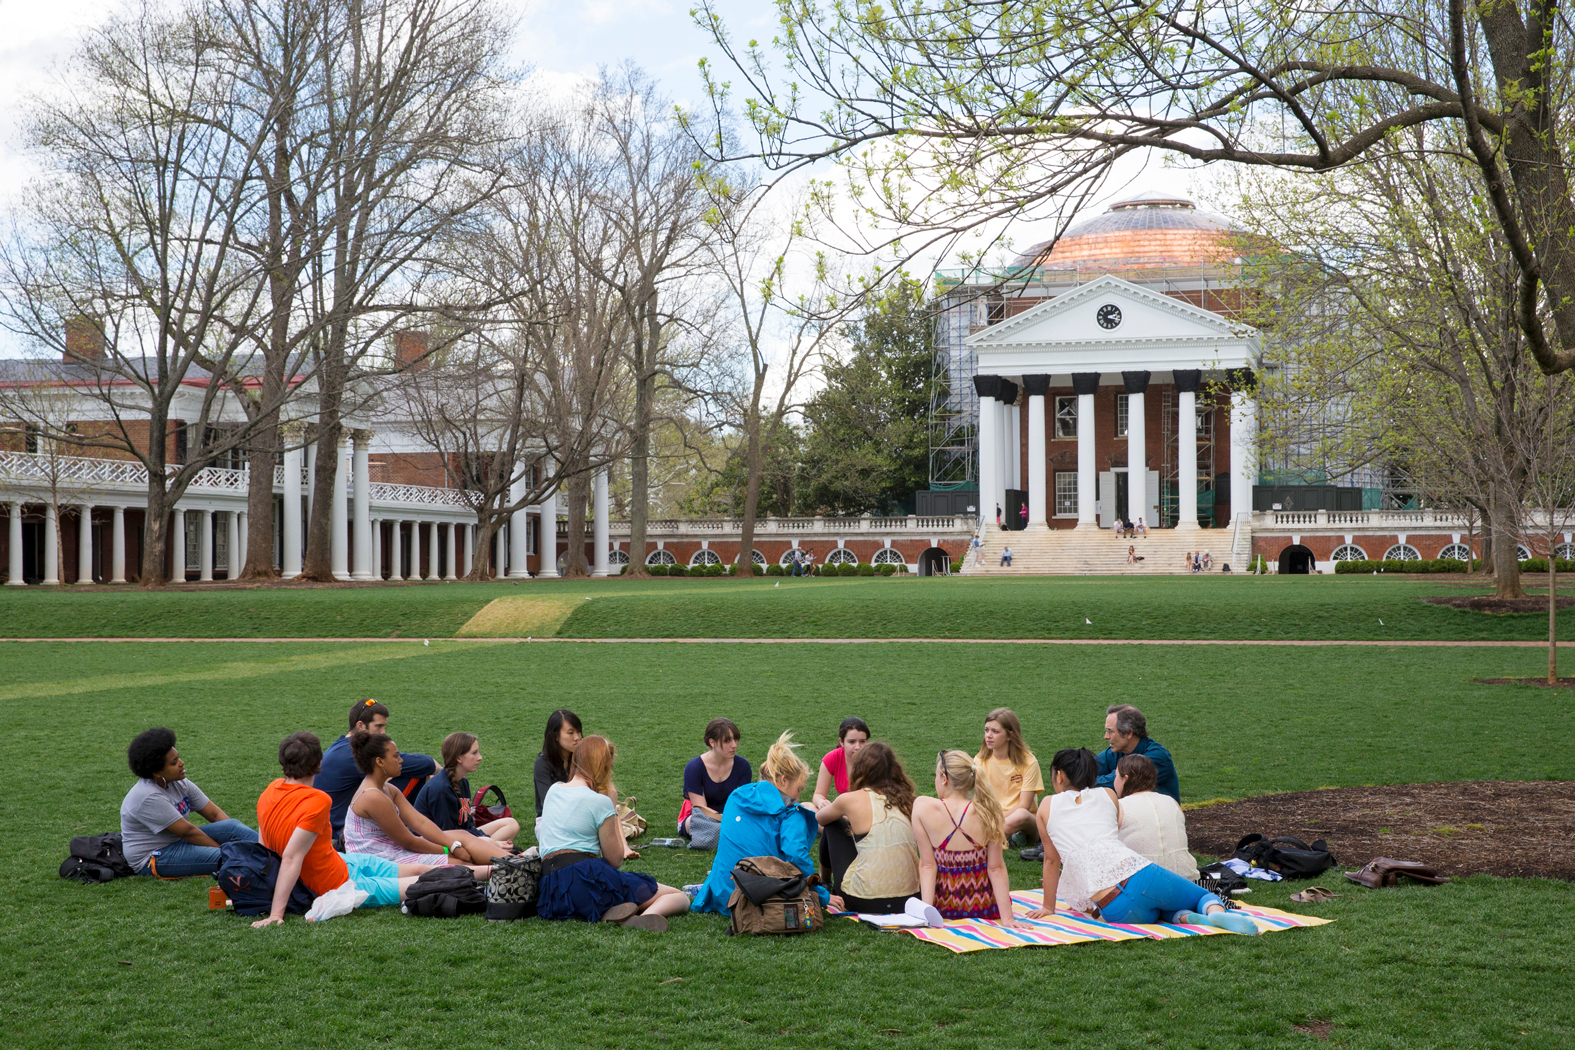 Students gathered on the lawn at The University of Virginia